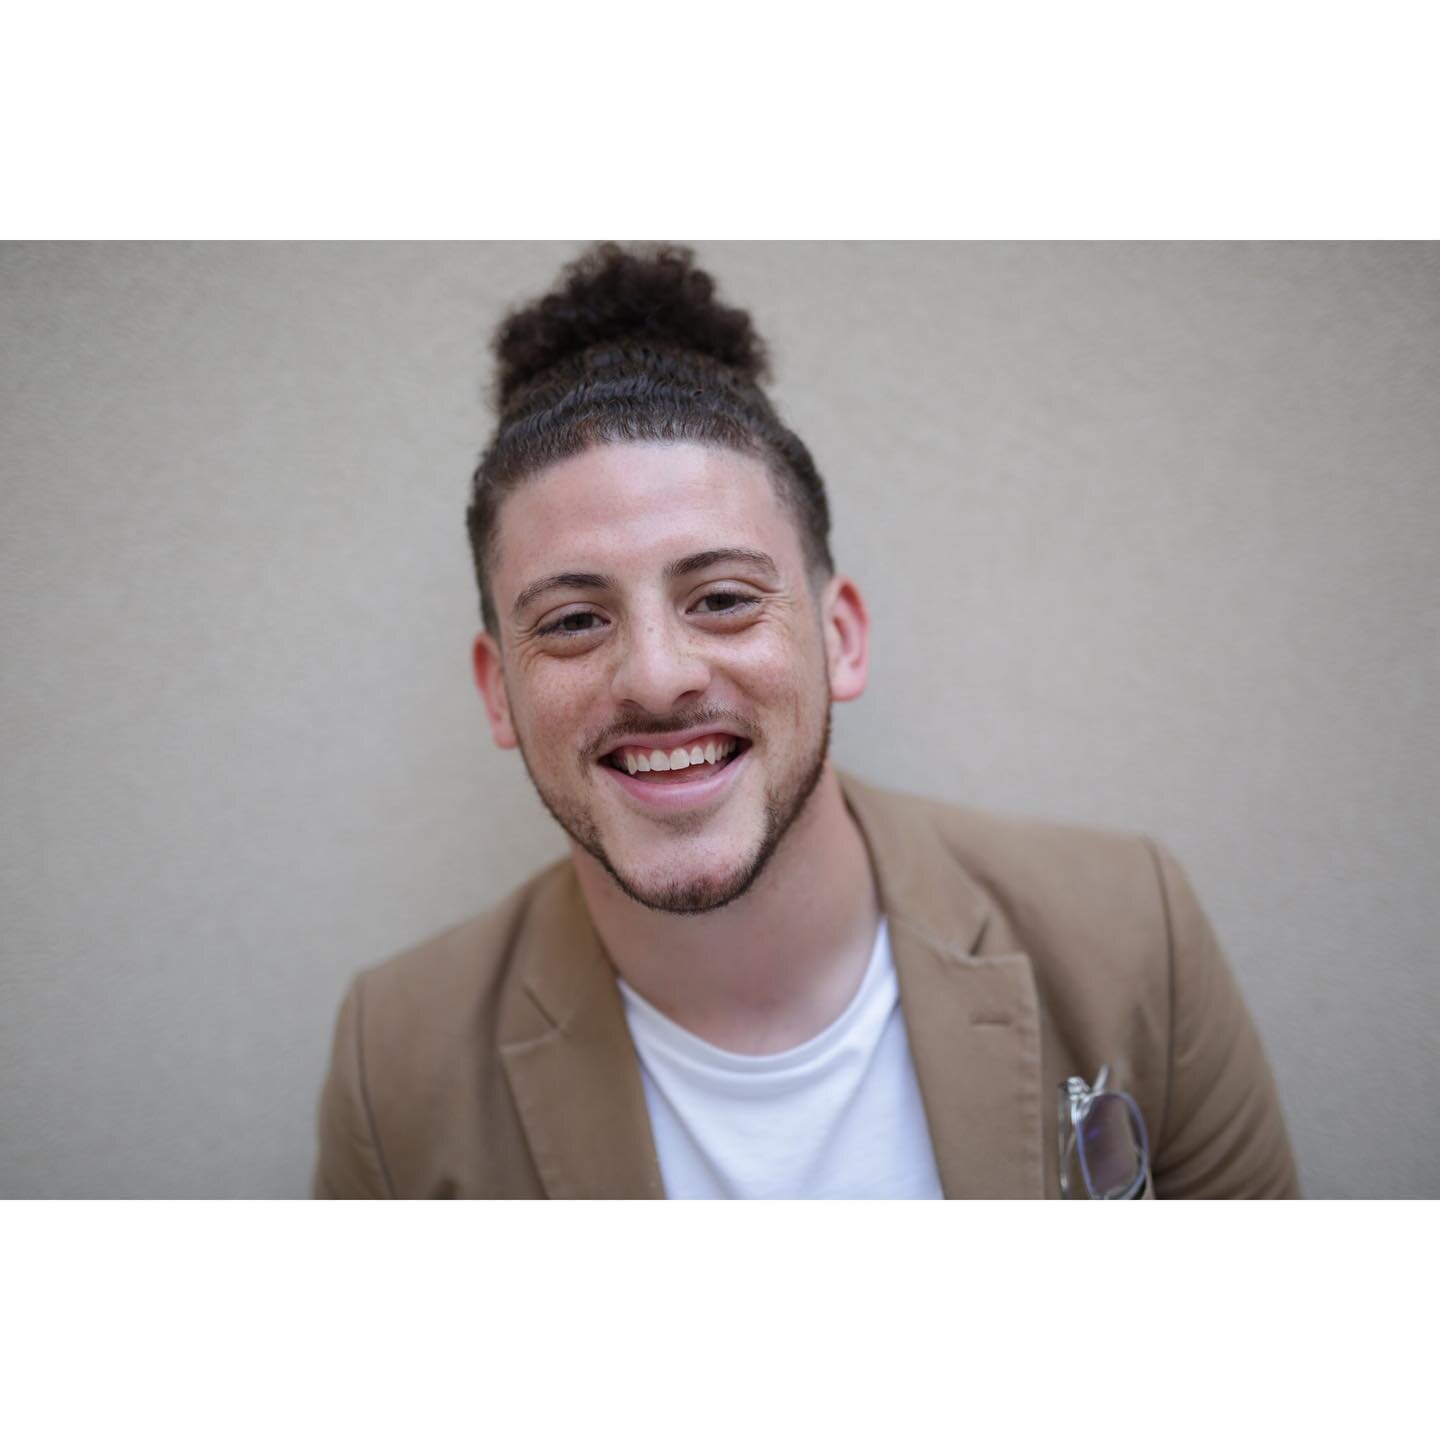 Meet the #Happyvism team! 

Justis Lopez  Co-Song Artist  Co-Book Author

Justis Lopez is an educator, DJ, poet, activist, son, and brother raised in Manchester, CT. He is the founder &amp; Chief Enthusiasm Officer (CEO) of Just Experience LLC, a sta